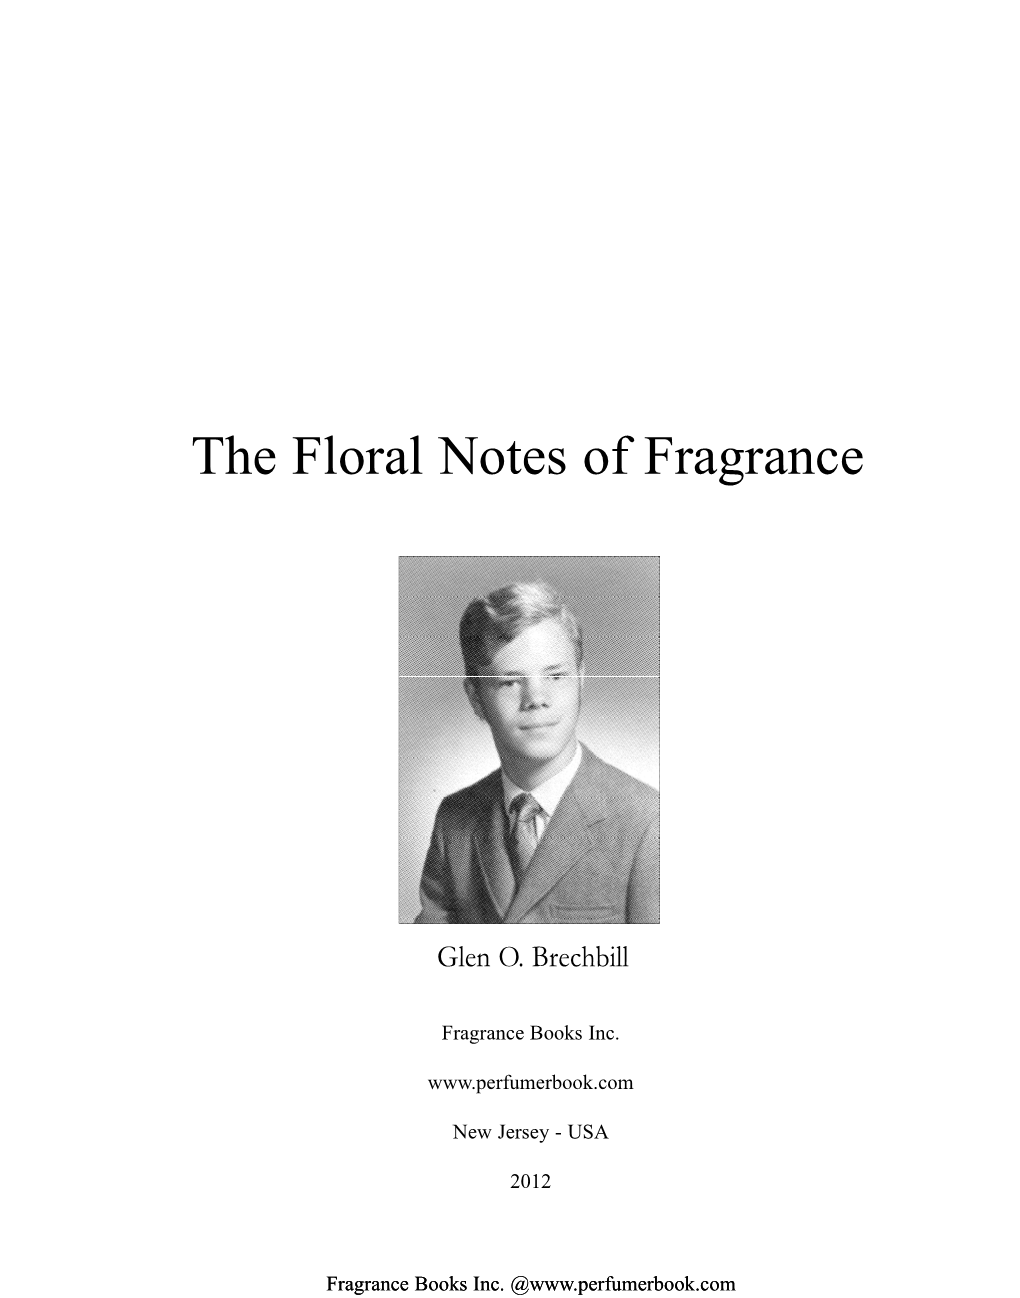 The Floral Notes of Fragrance